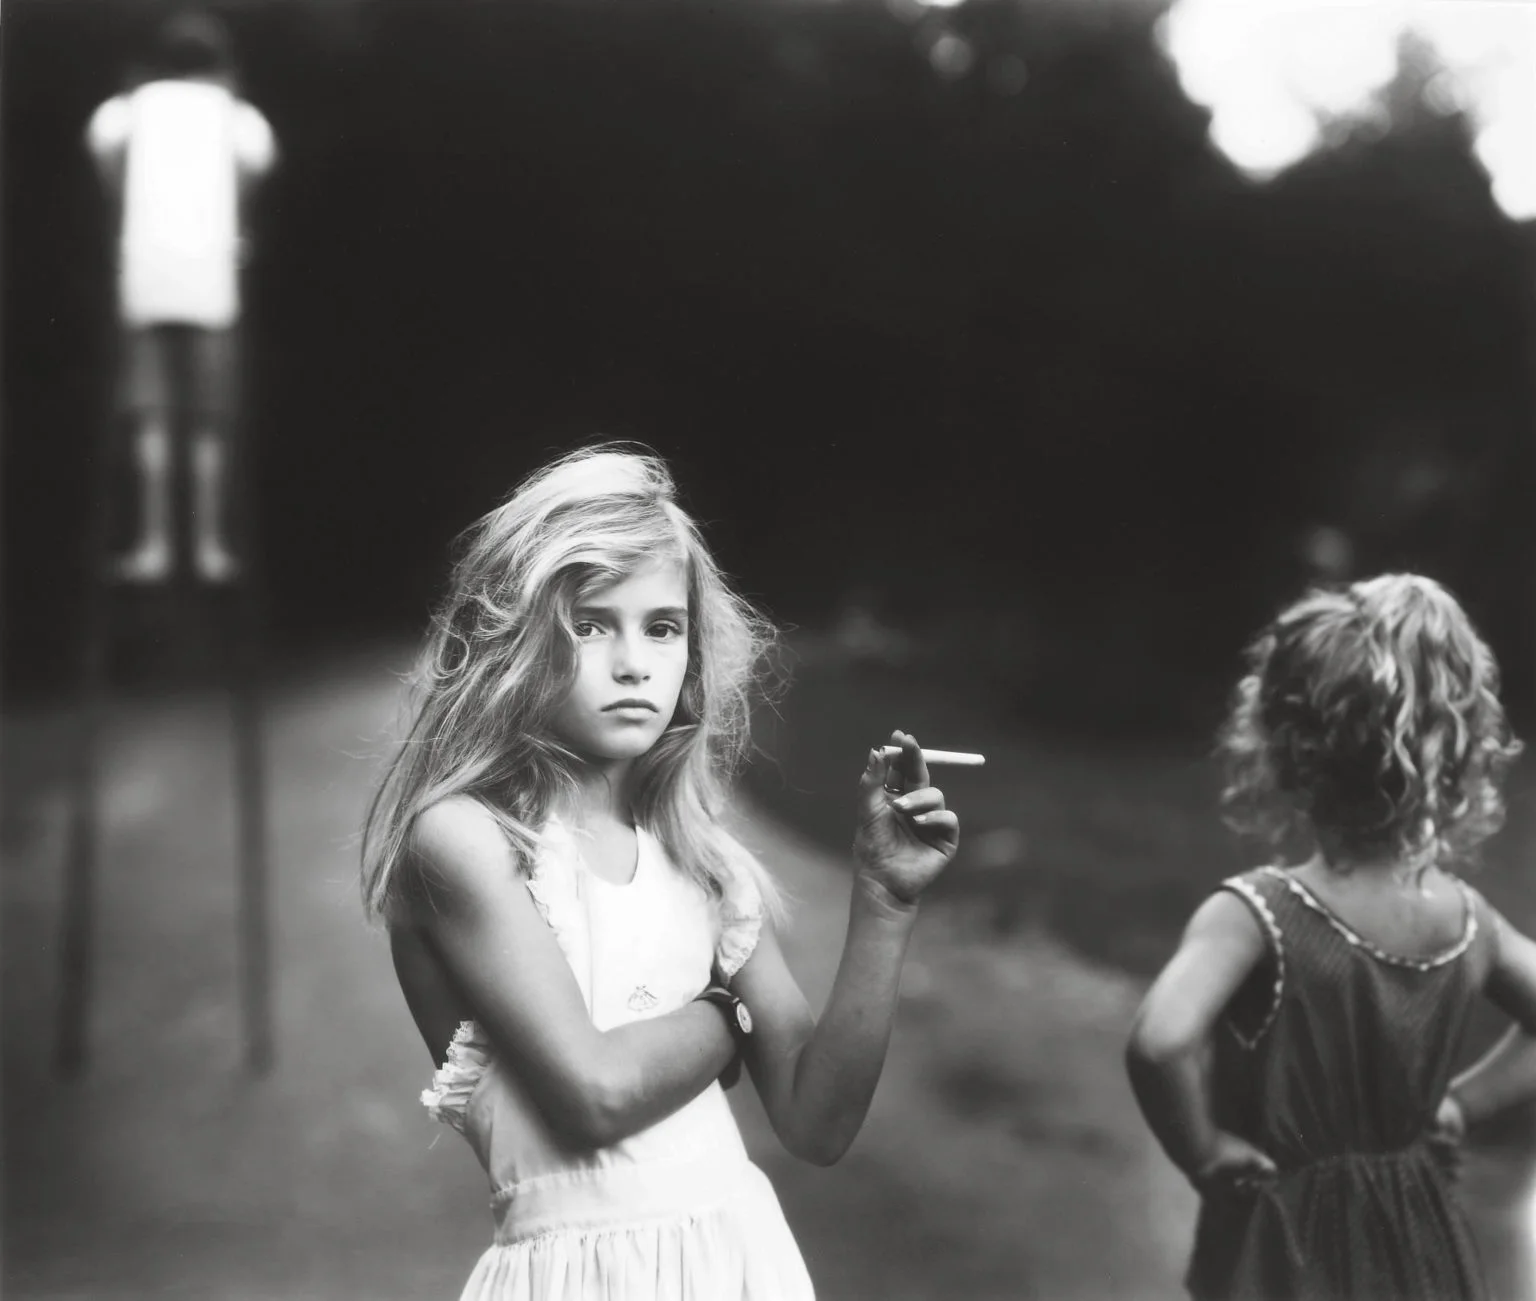 A young girl holding a candy cigarette as if she's smoking